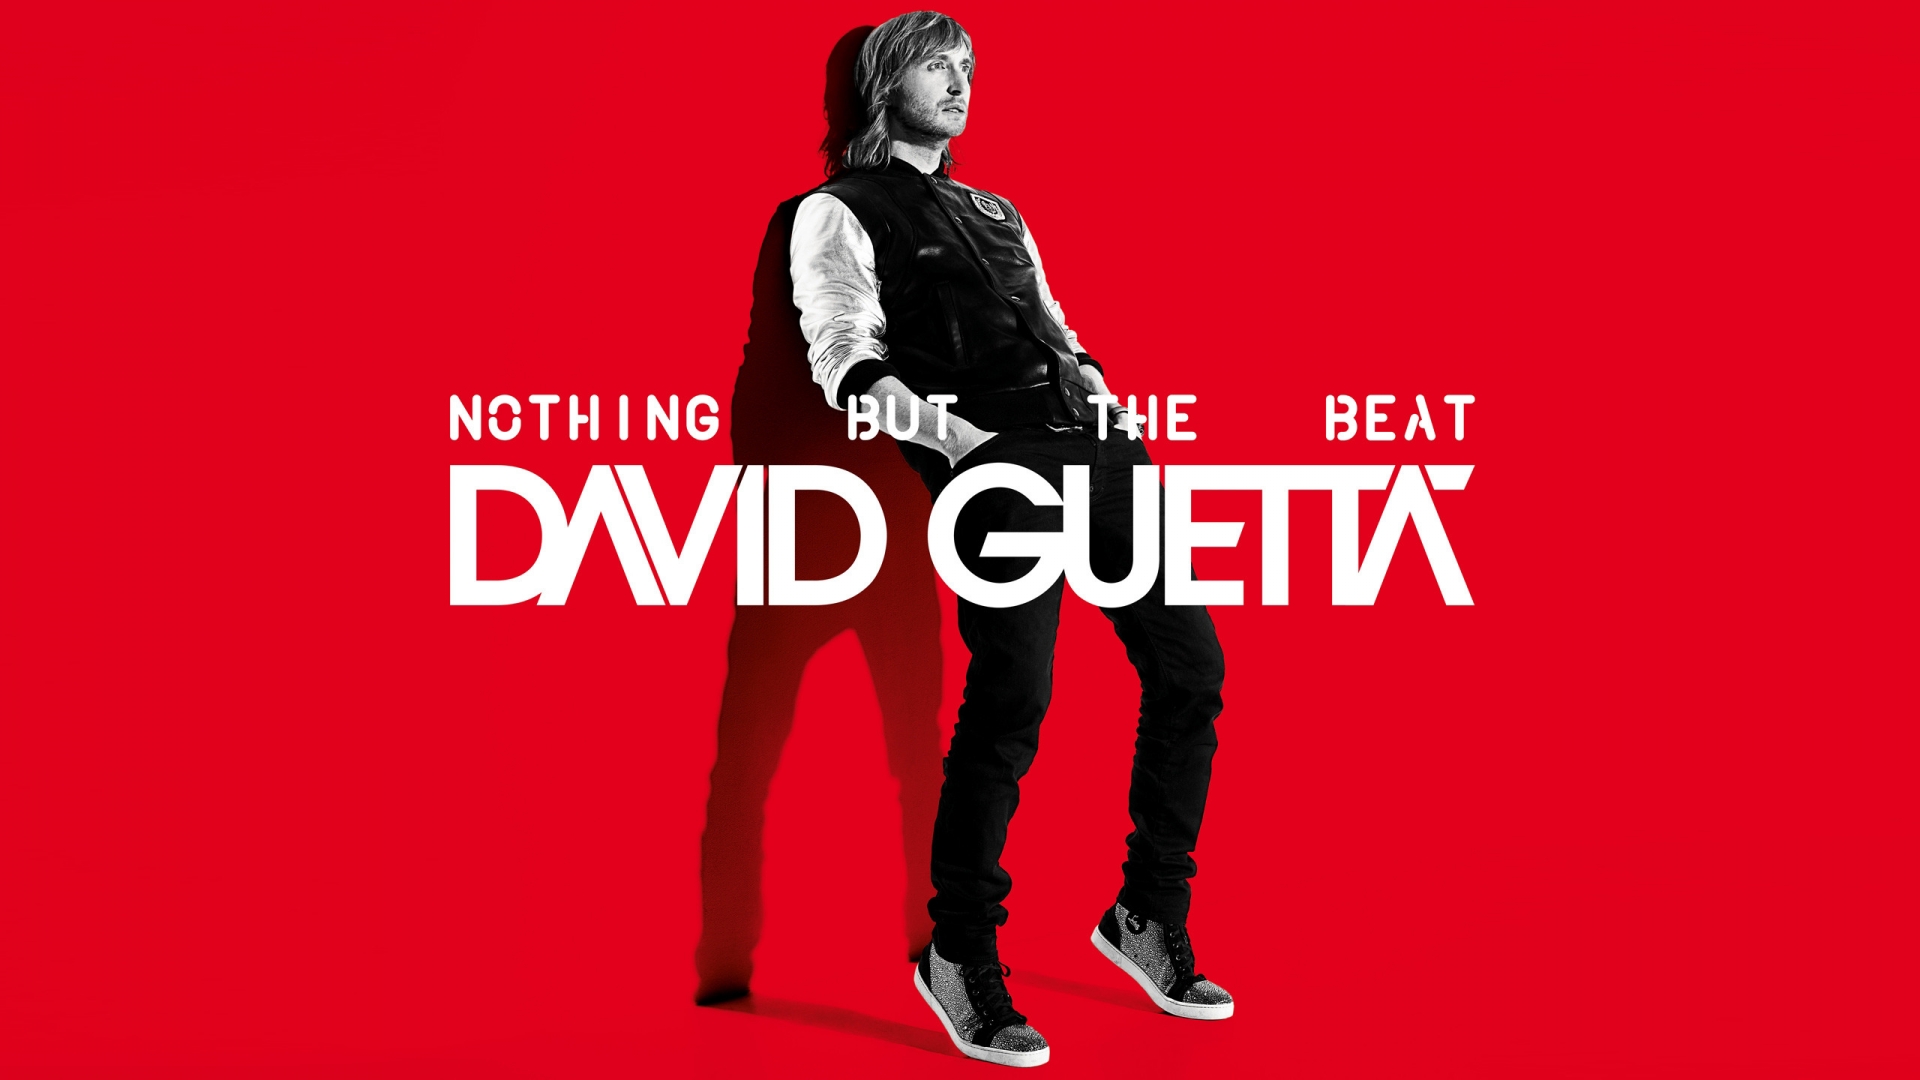 David Guetta Nothing But the Beat for 1920 x 1080 HDTV 1080p resolution